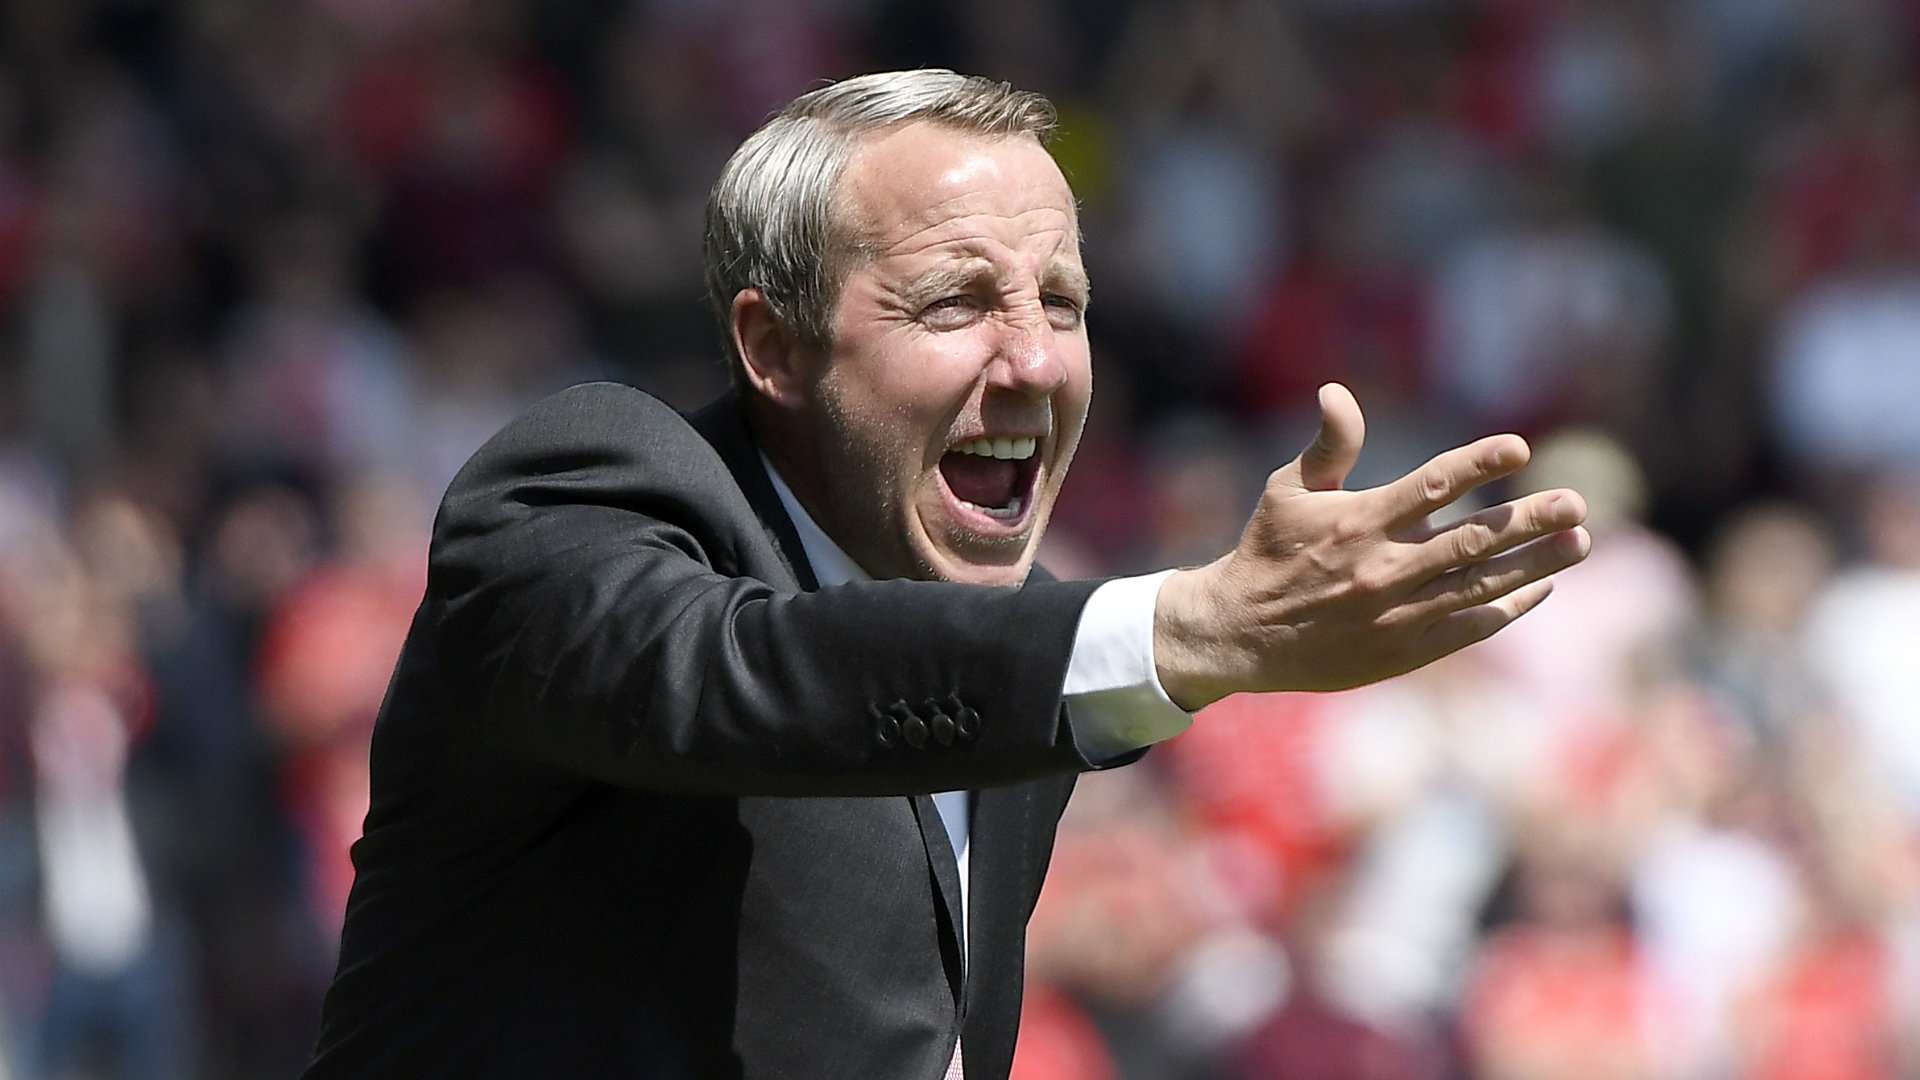 Lee Bowyer Charlton manager 2018-19